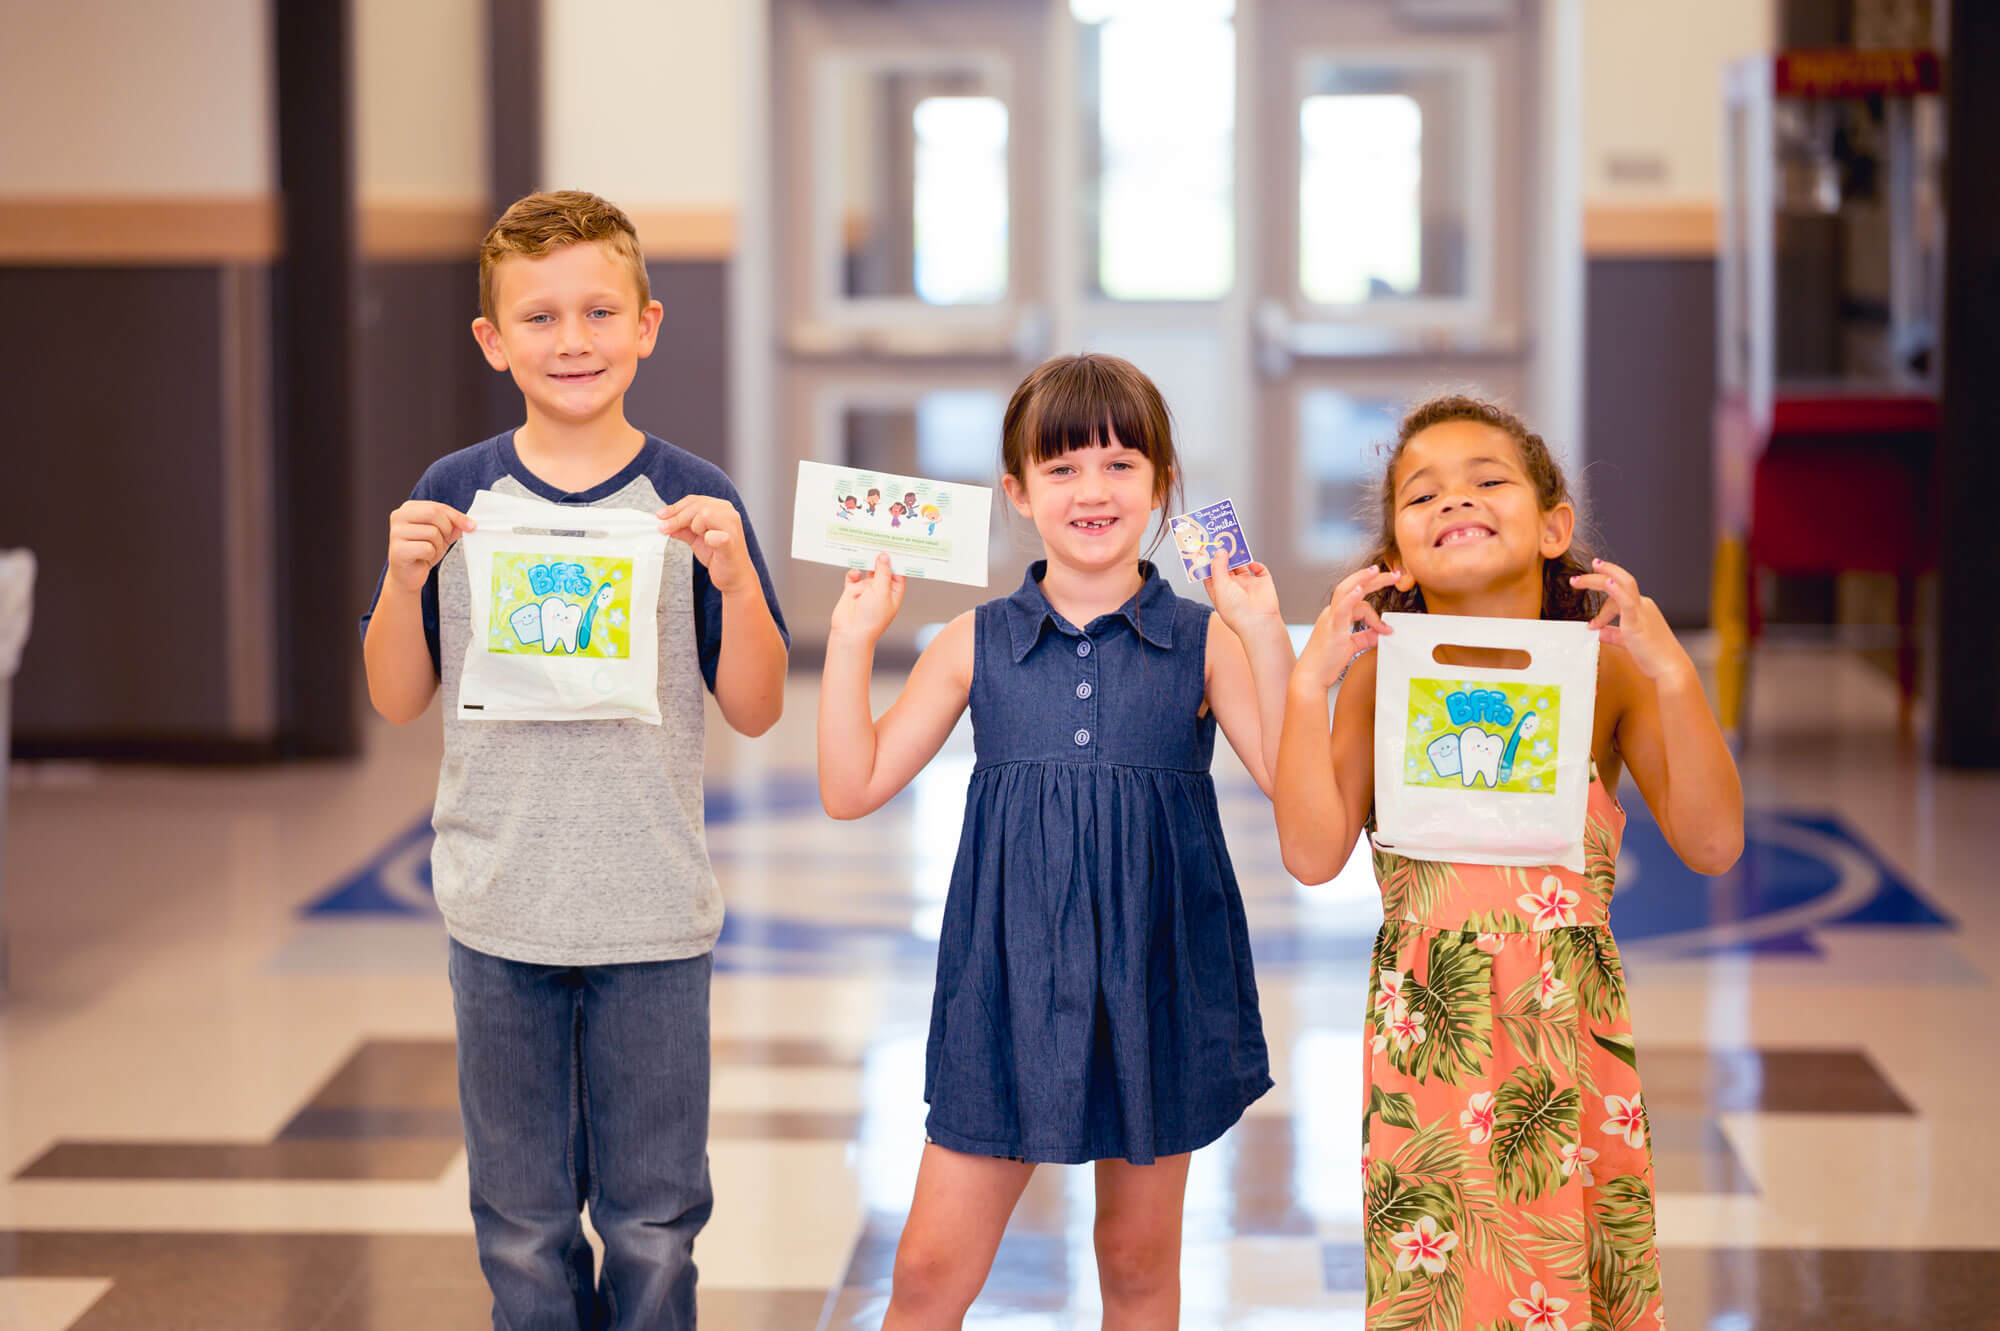 Three kids holding up cards in a hallway.